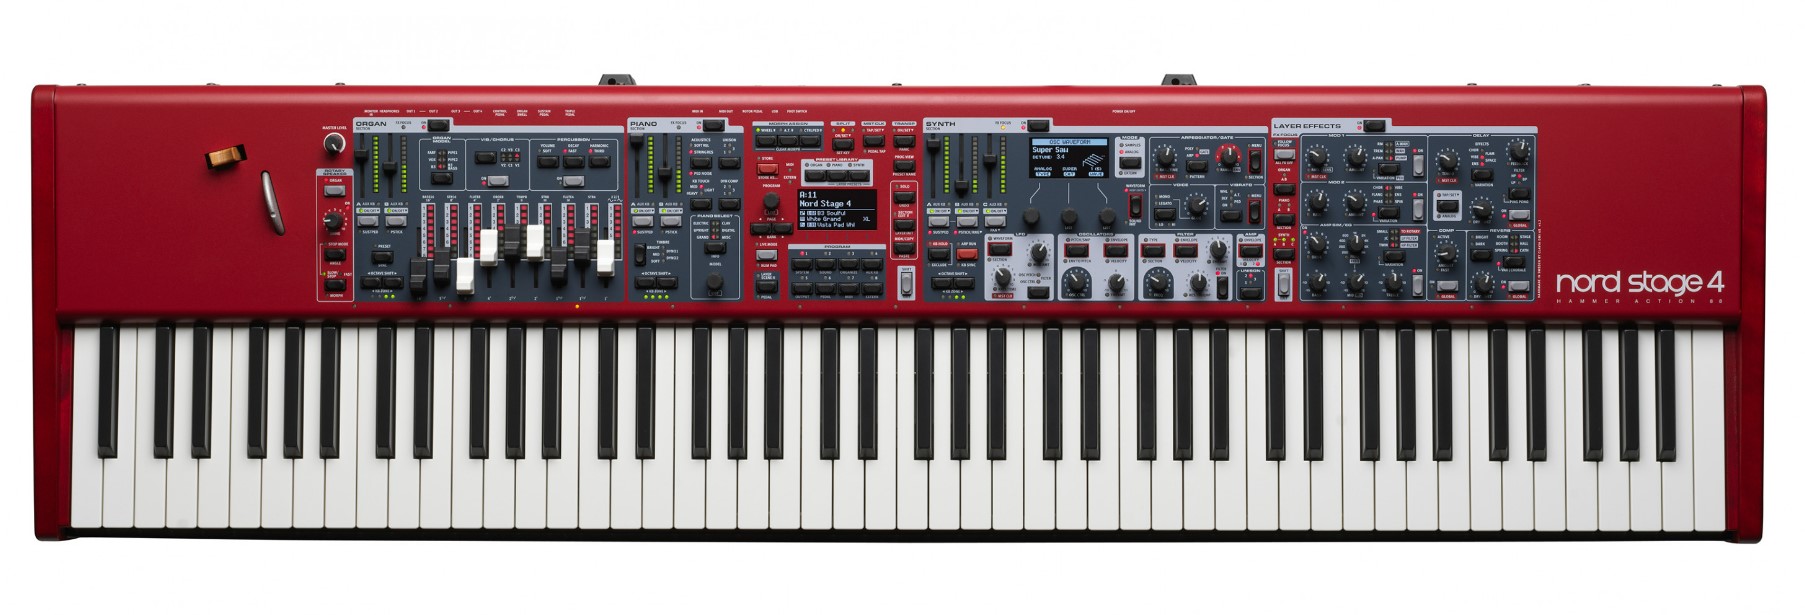 Nord Stage 4 - Top view